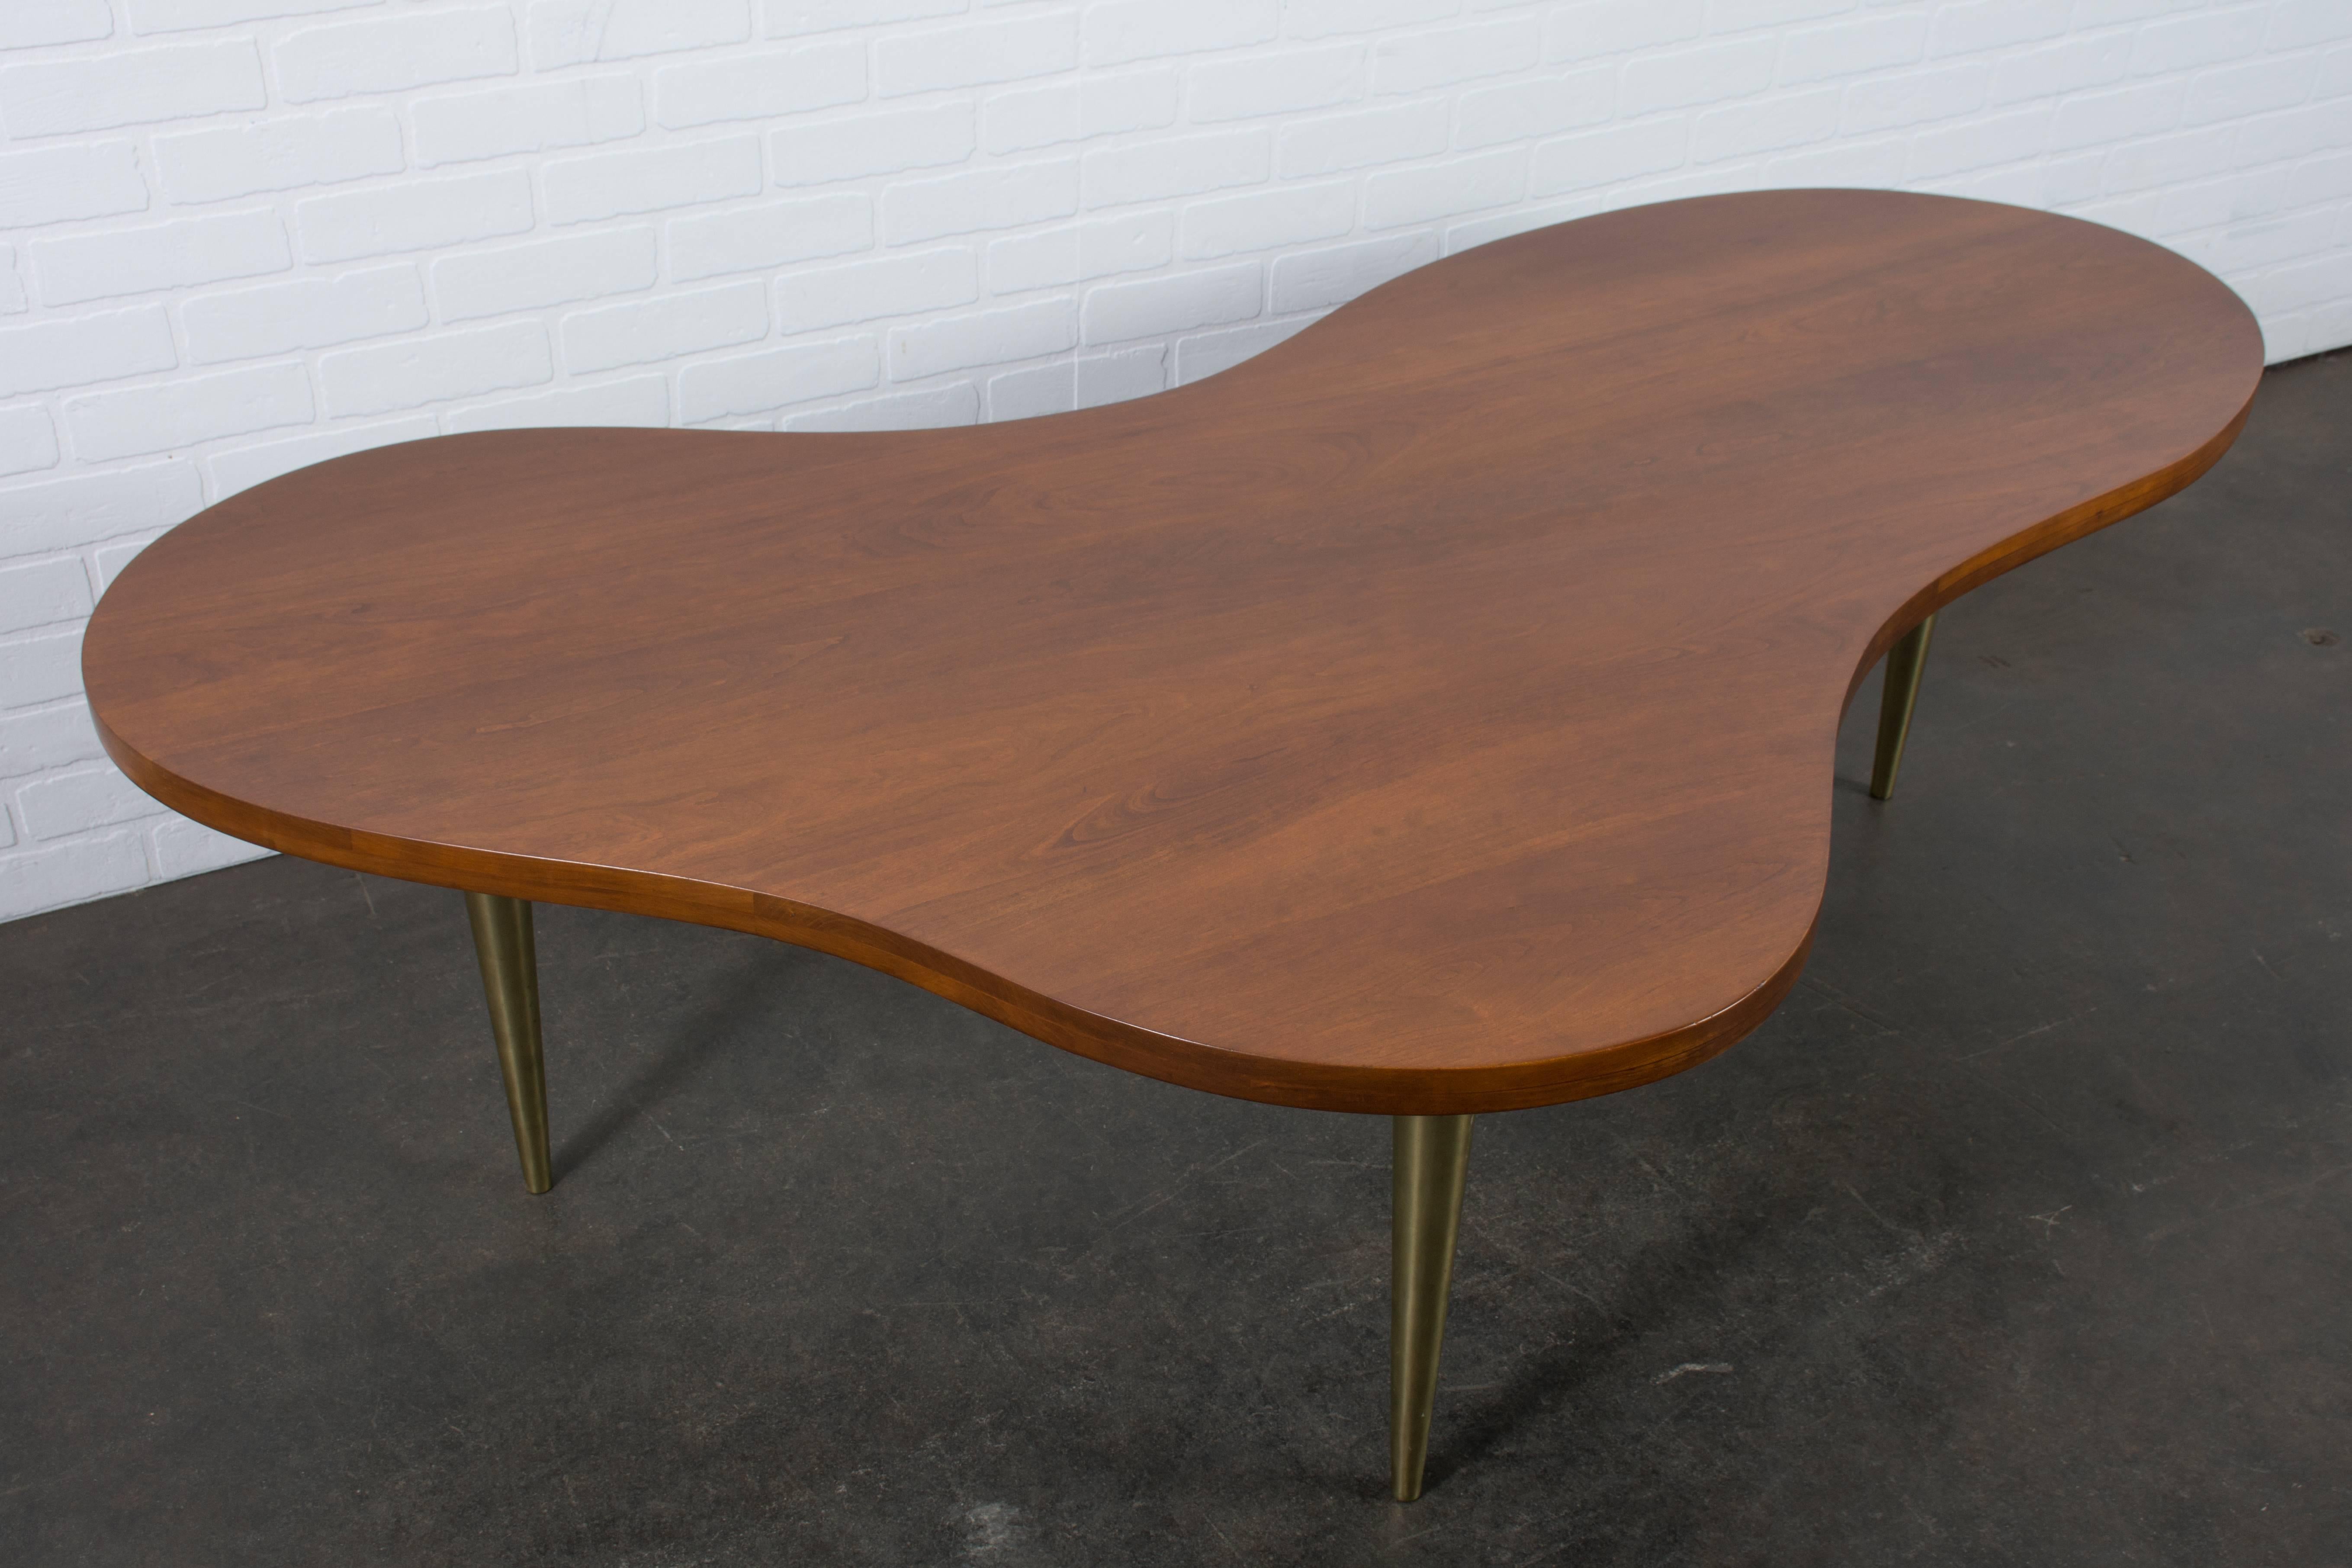 This vintage Mid-Century coffee table was designed by Terence Howard Robsjohn-Gibbings for Widdicomb in the 1950s. It features a metamorphic walnut top with the designer's signature softly contoured edges and three brass tapered legs. Widdicomb